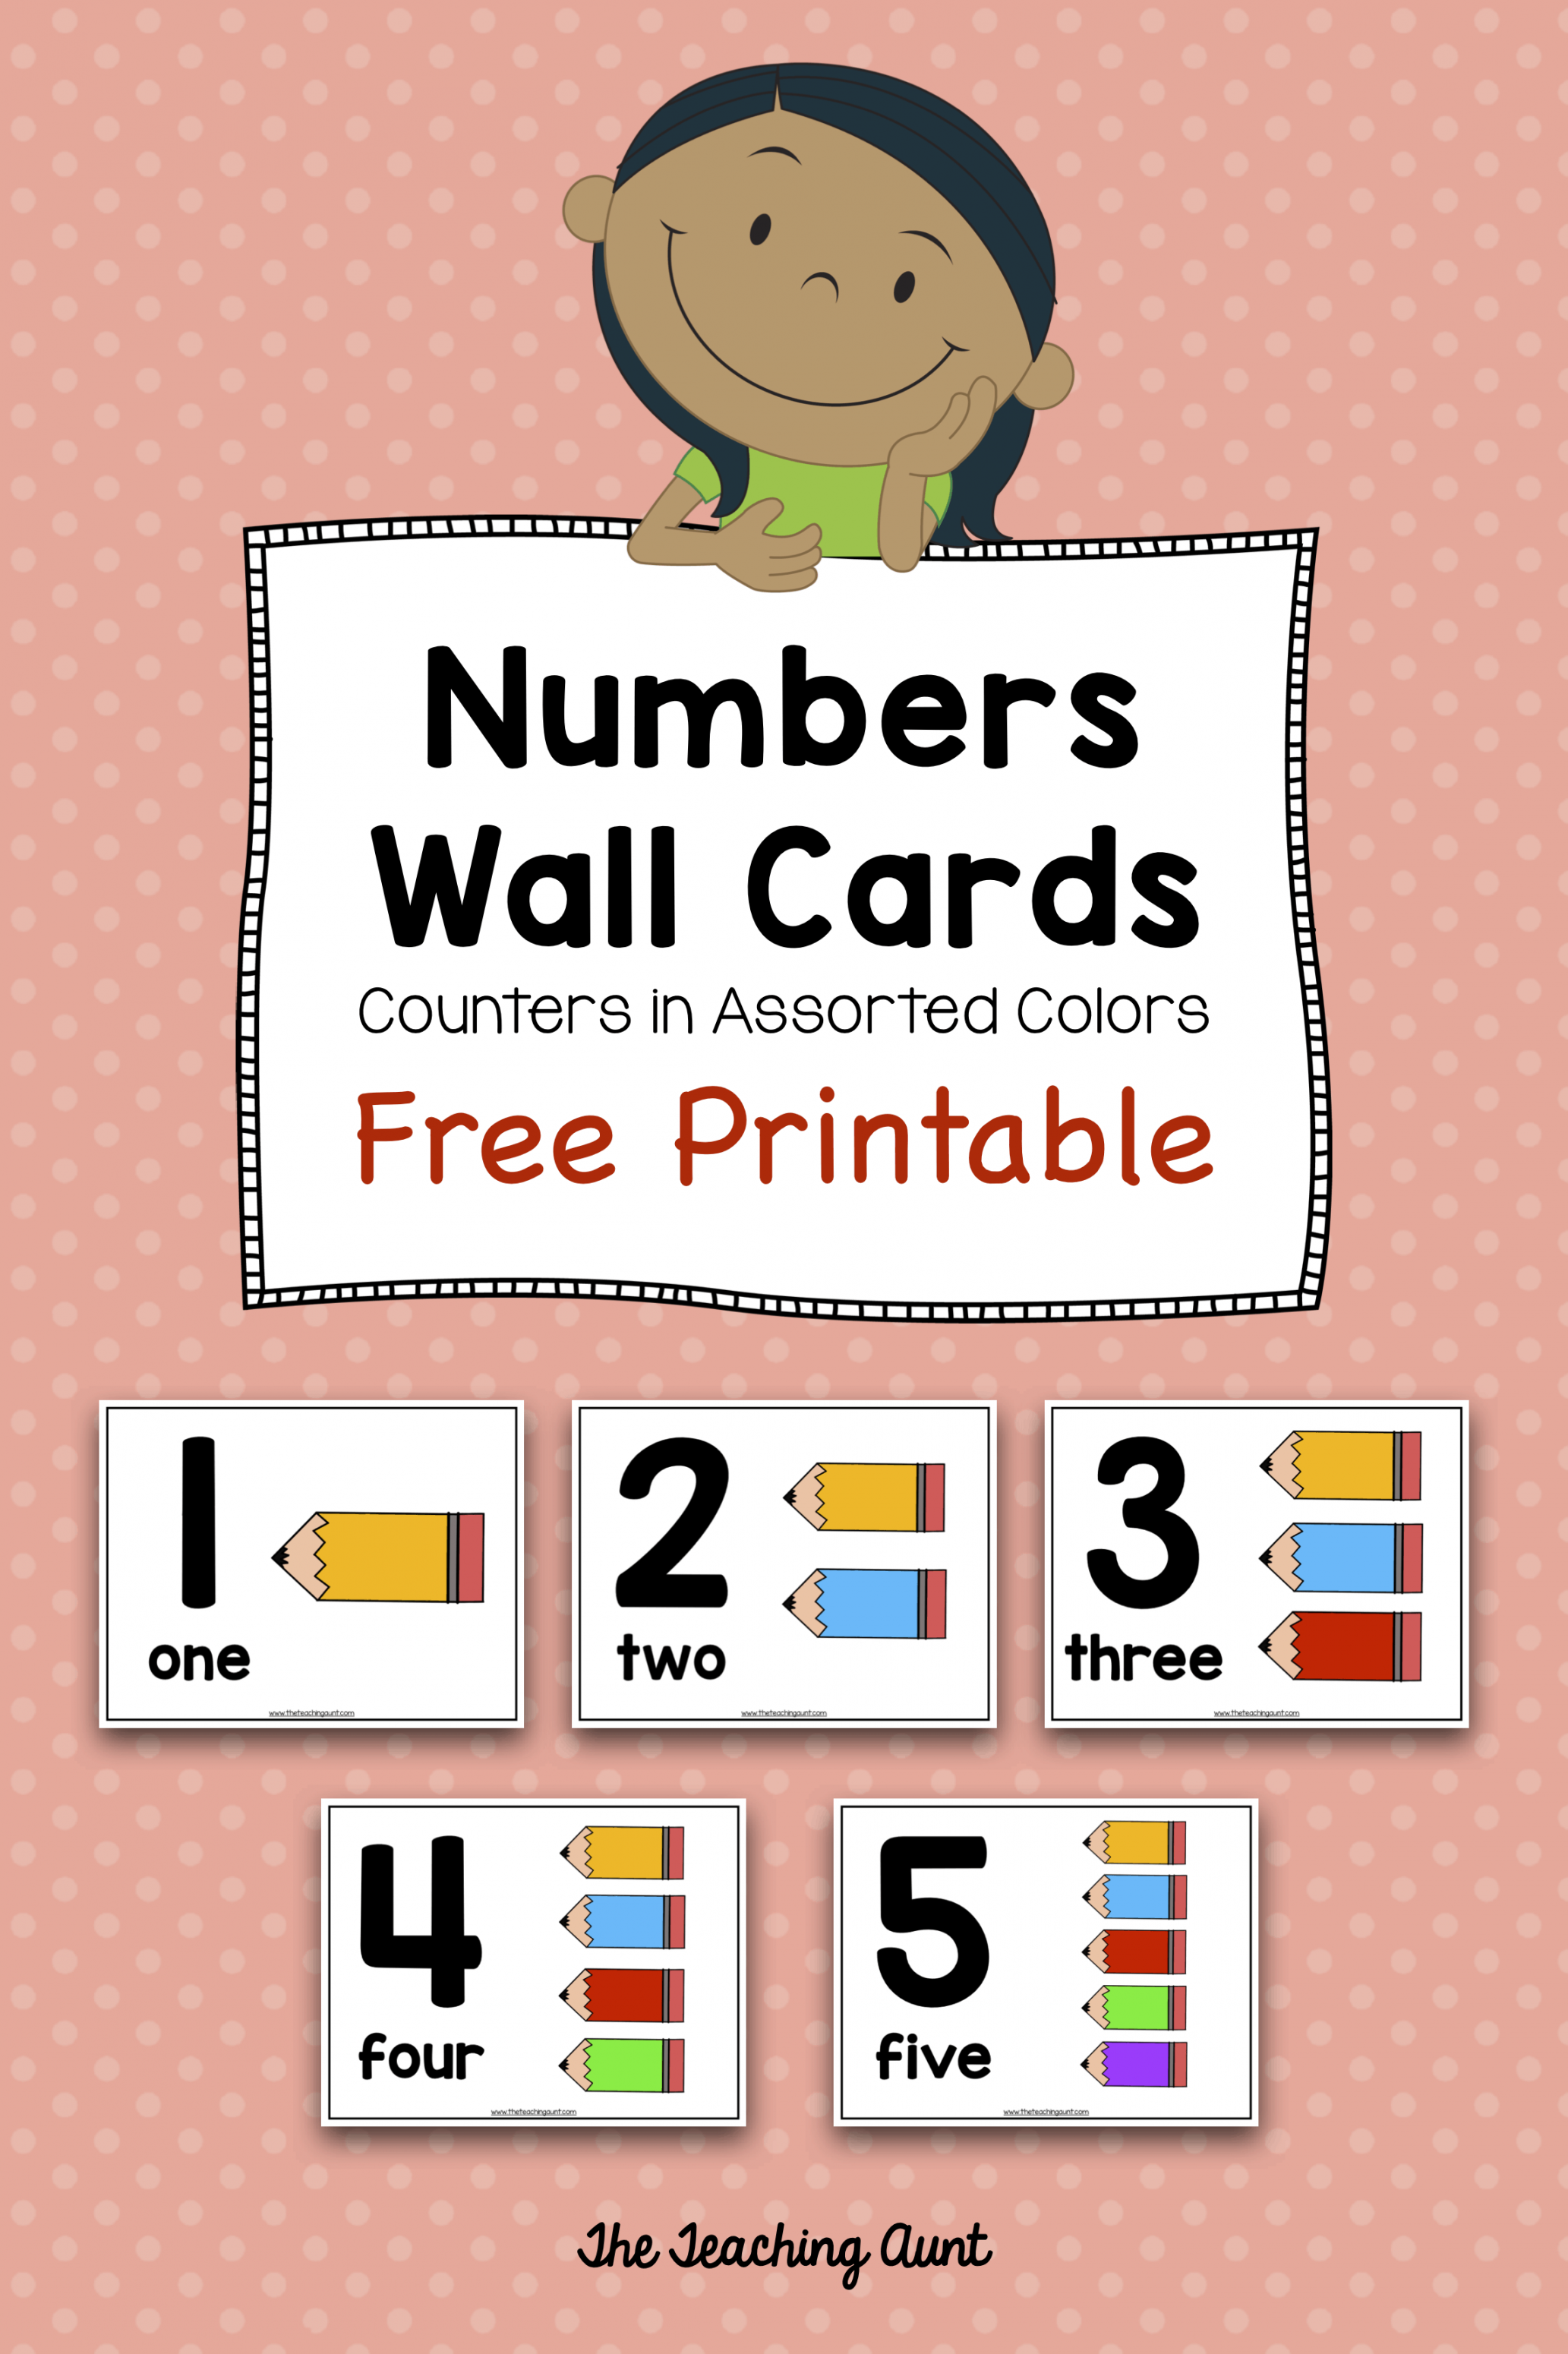 Number Wall Cards for Preschoolers with Colorful Pencil Counters